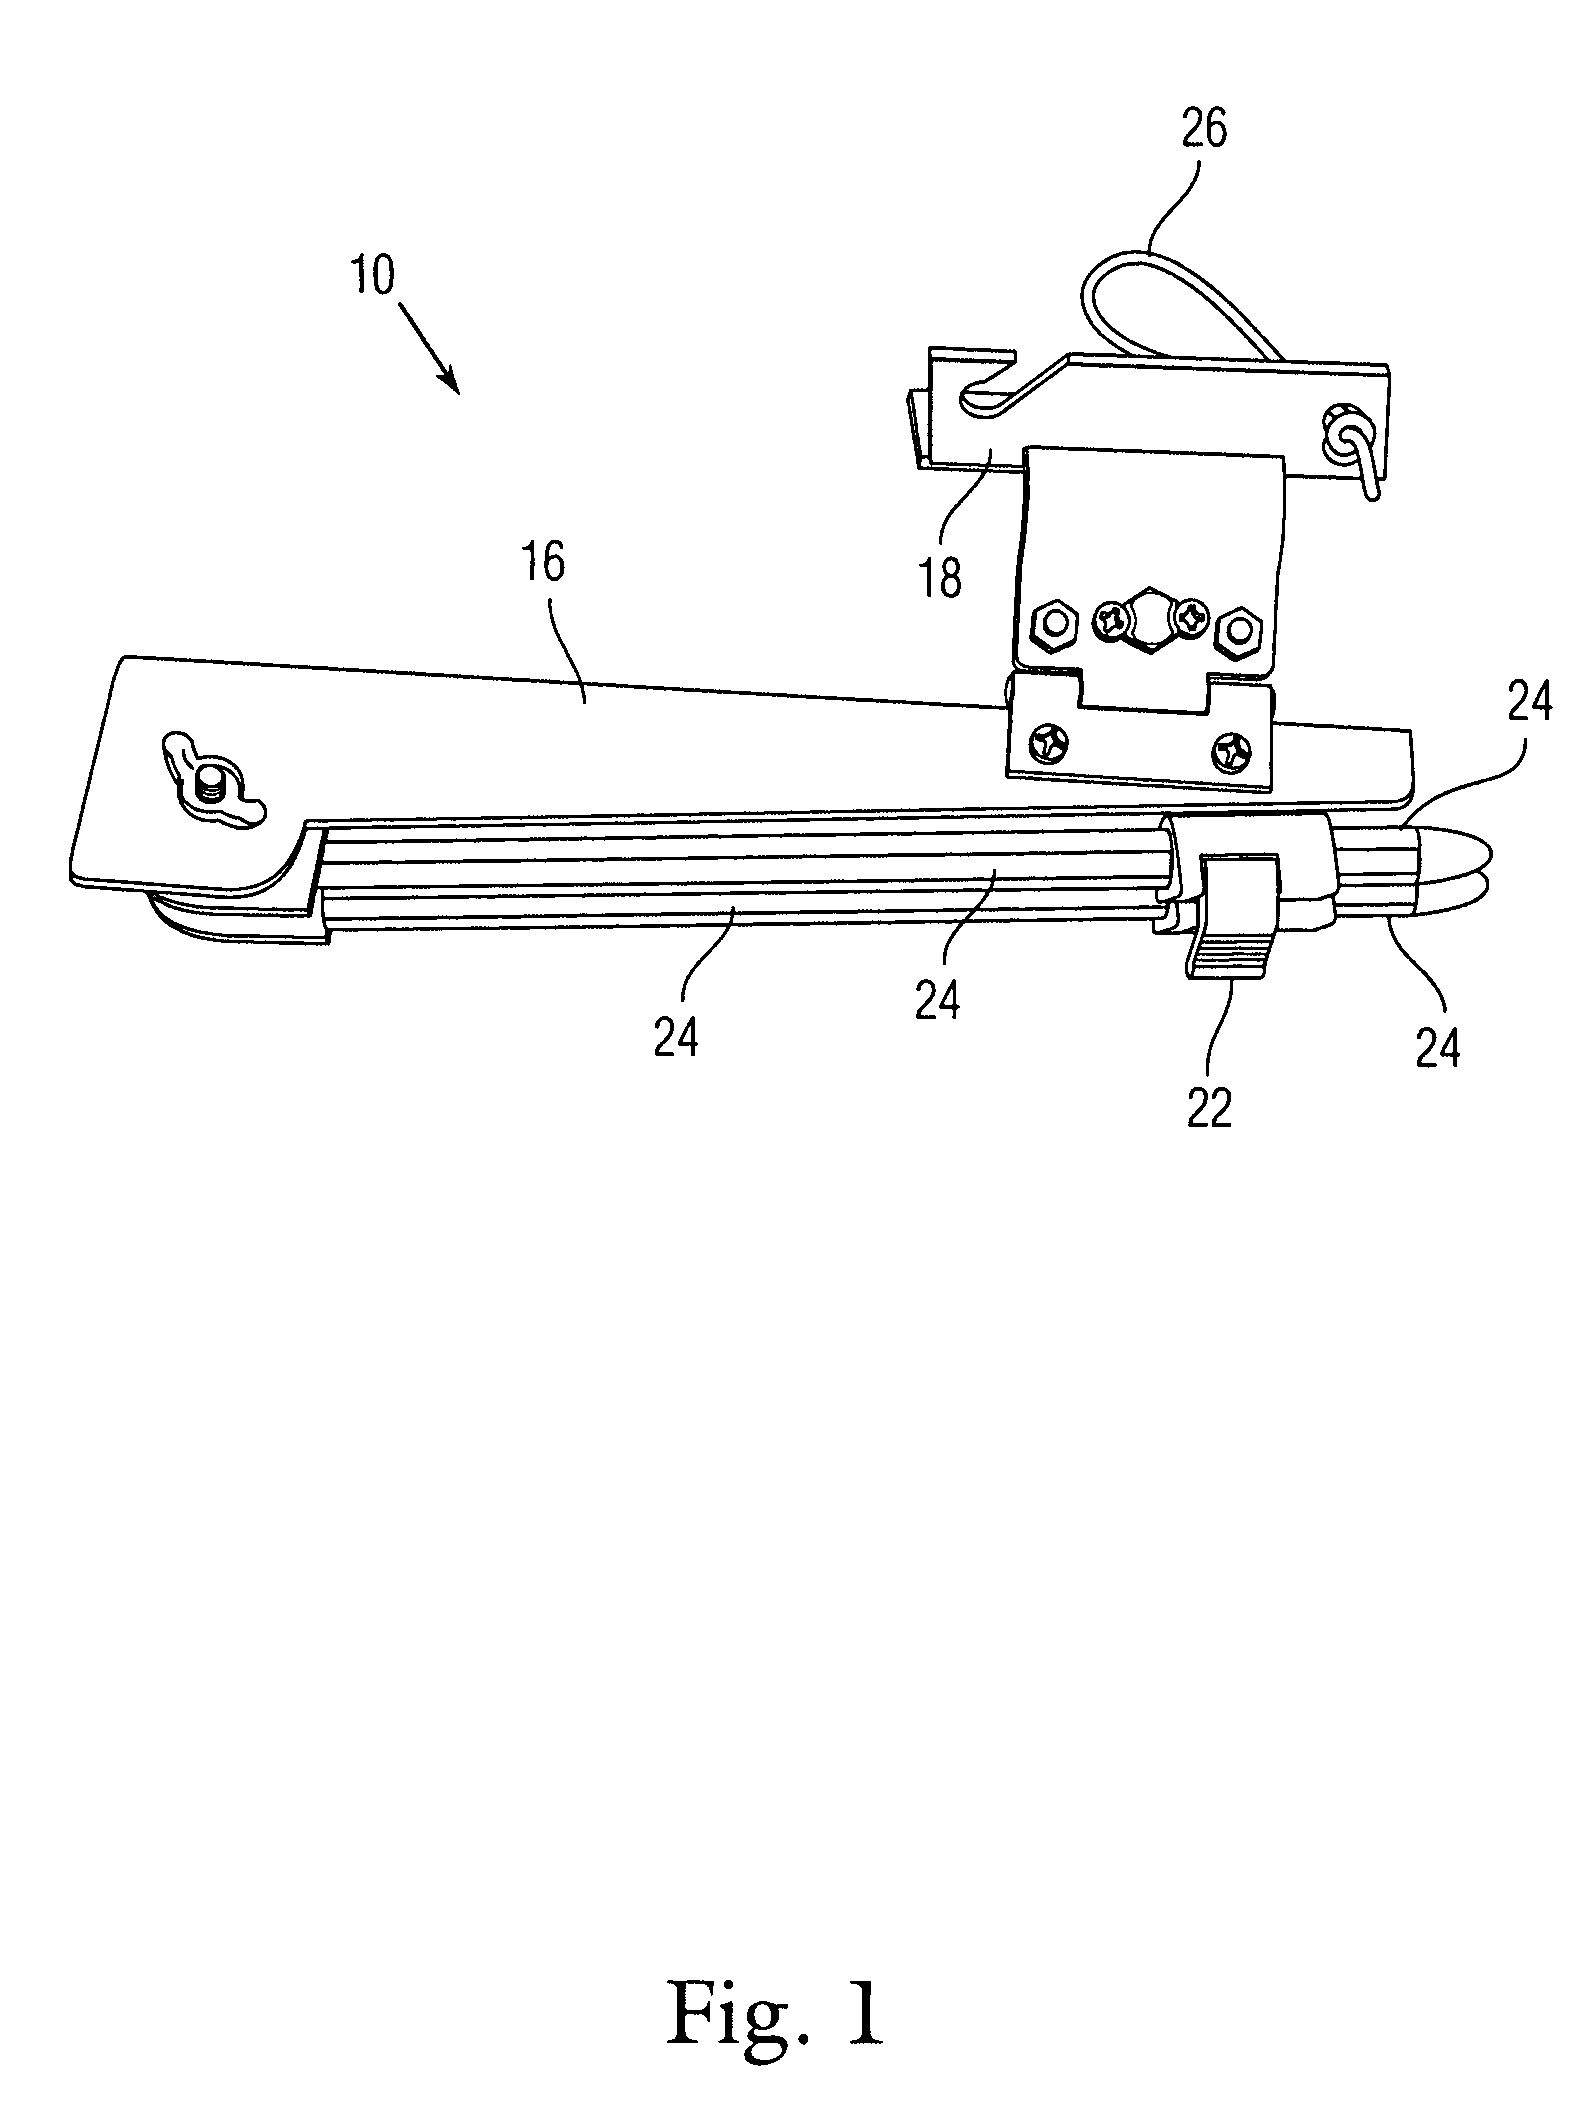 Device for safely raising and lowering a rifle between the ground and an elevated stand